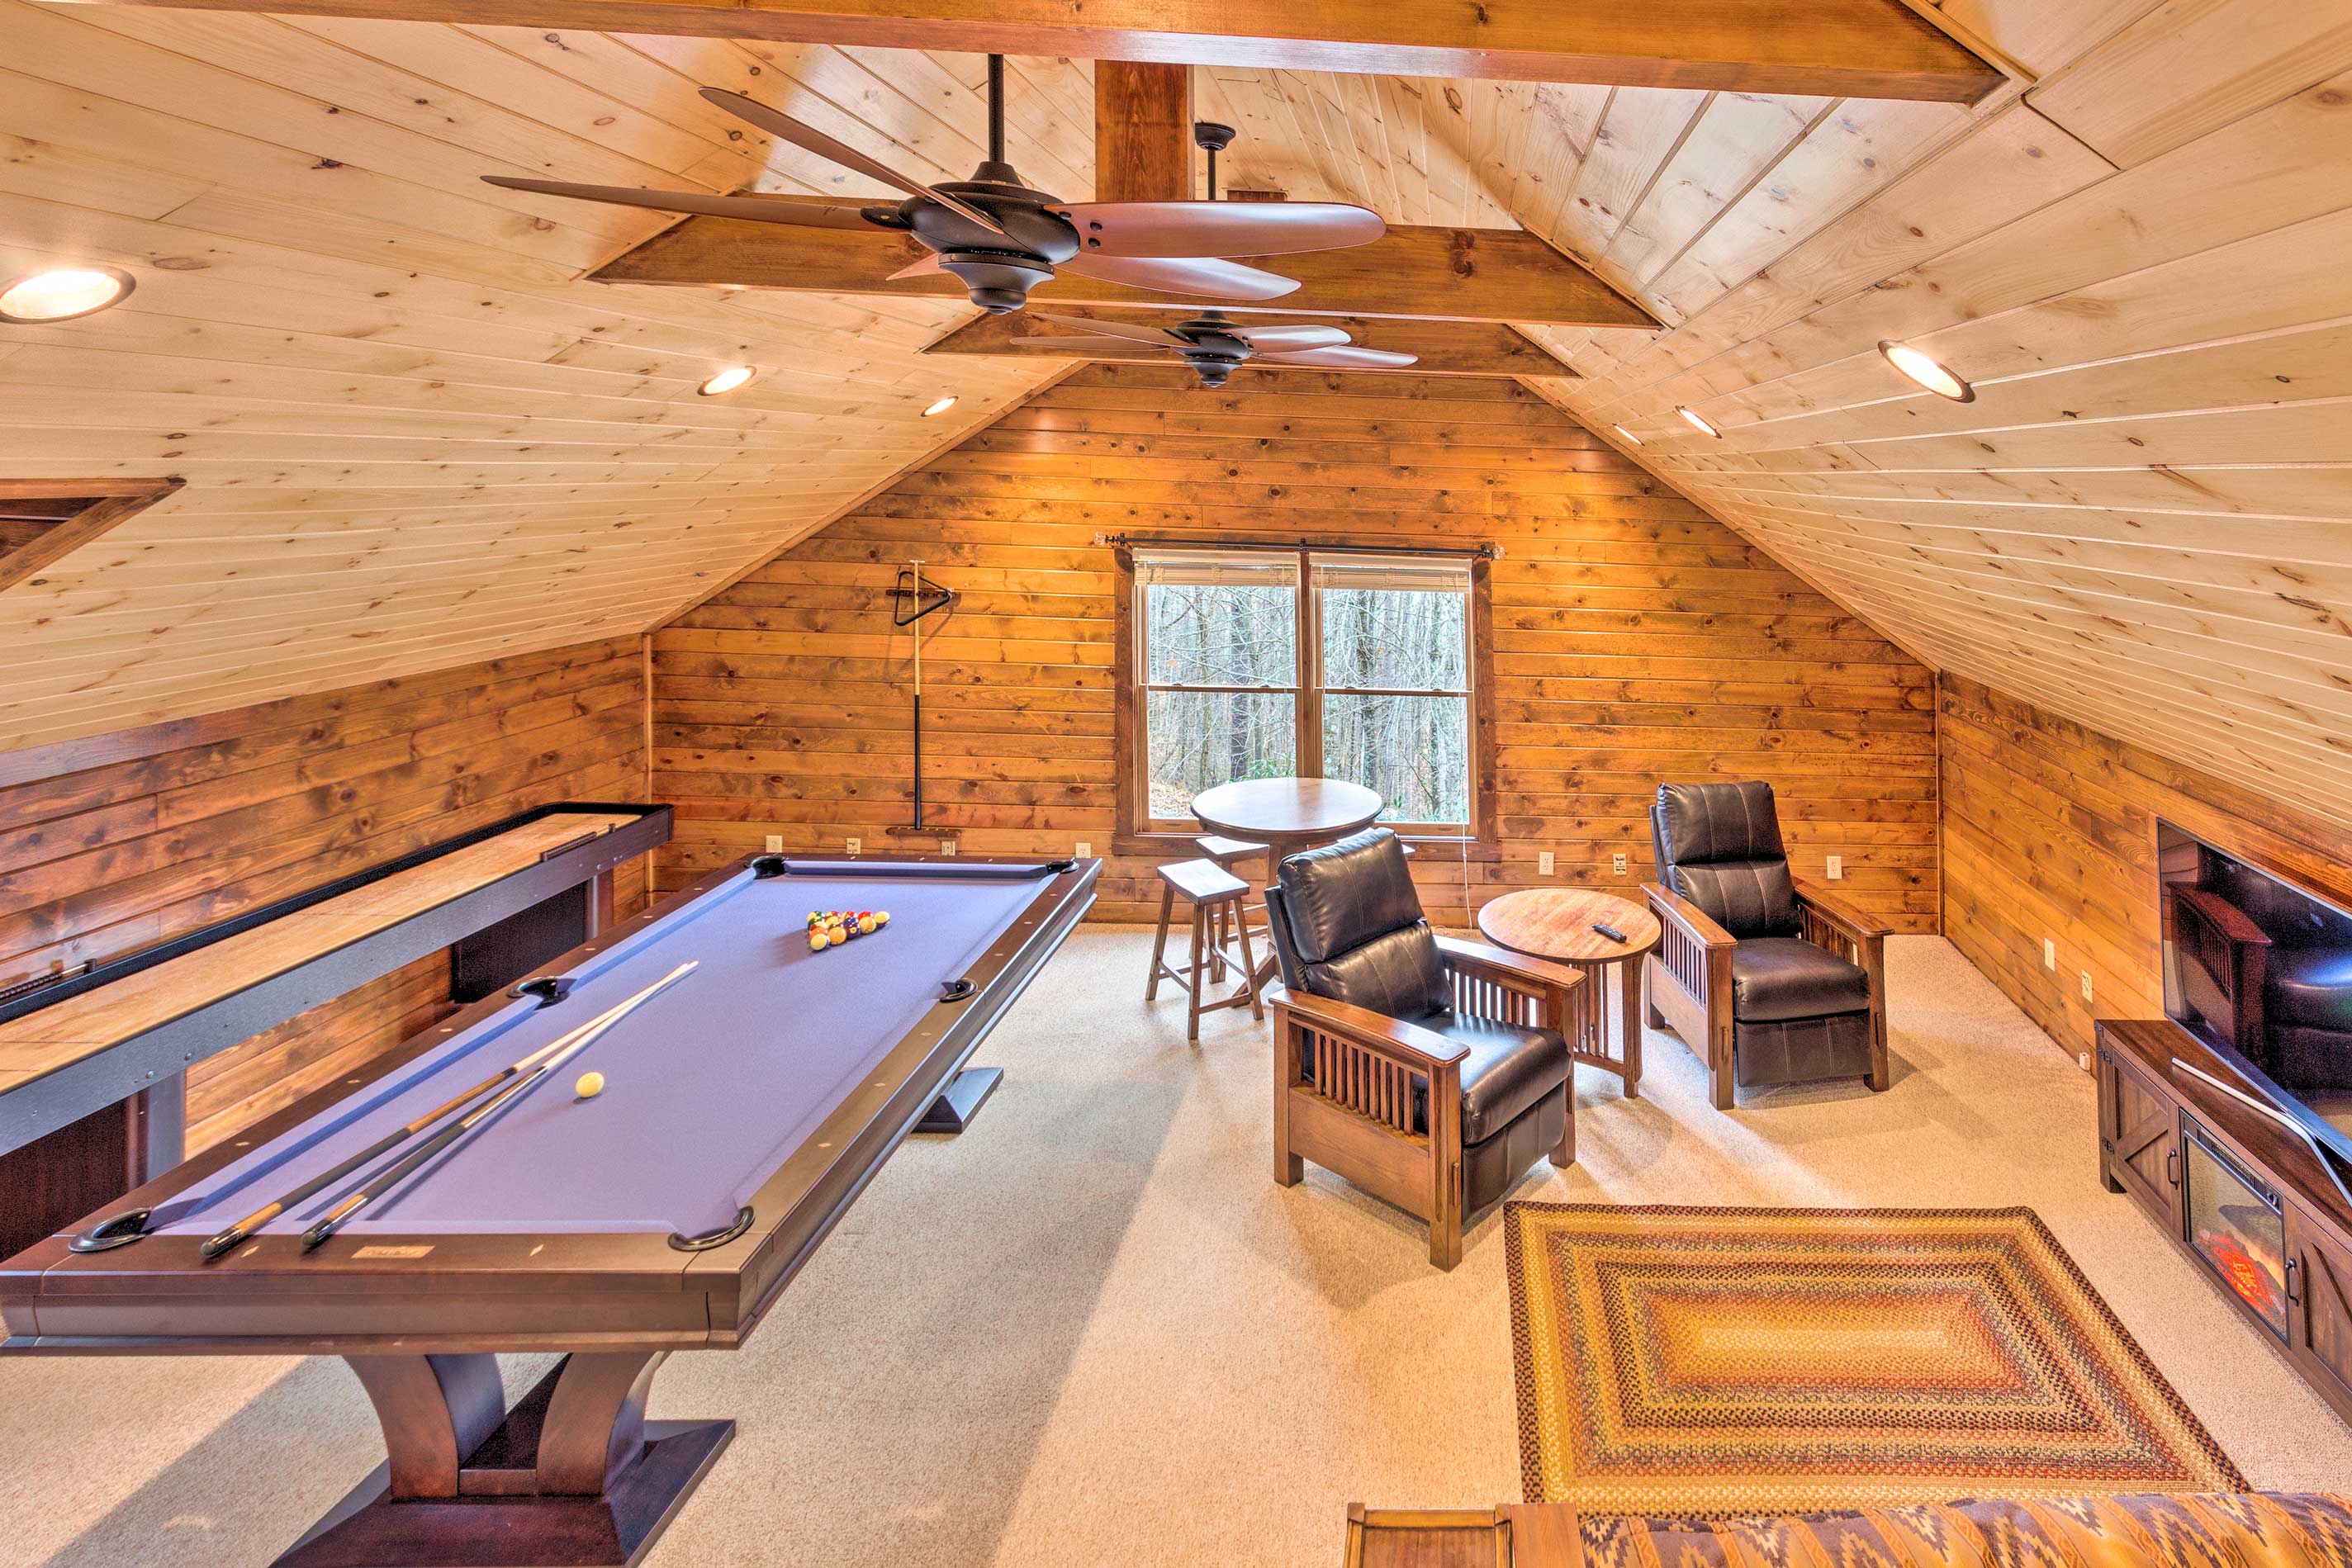 This Boone vacation rental cabin hosts up to 12 guests.